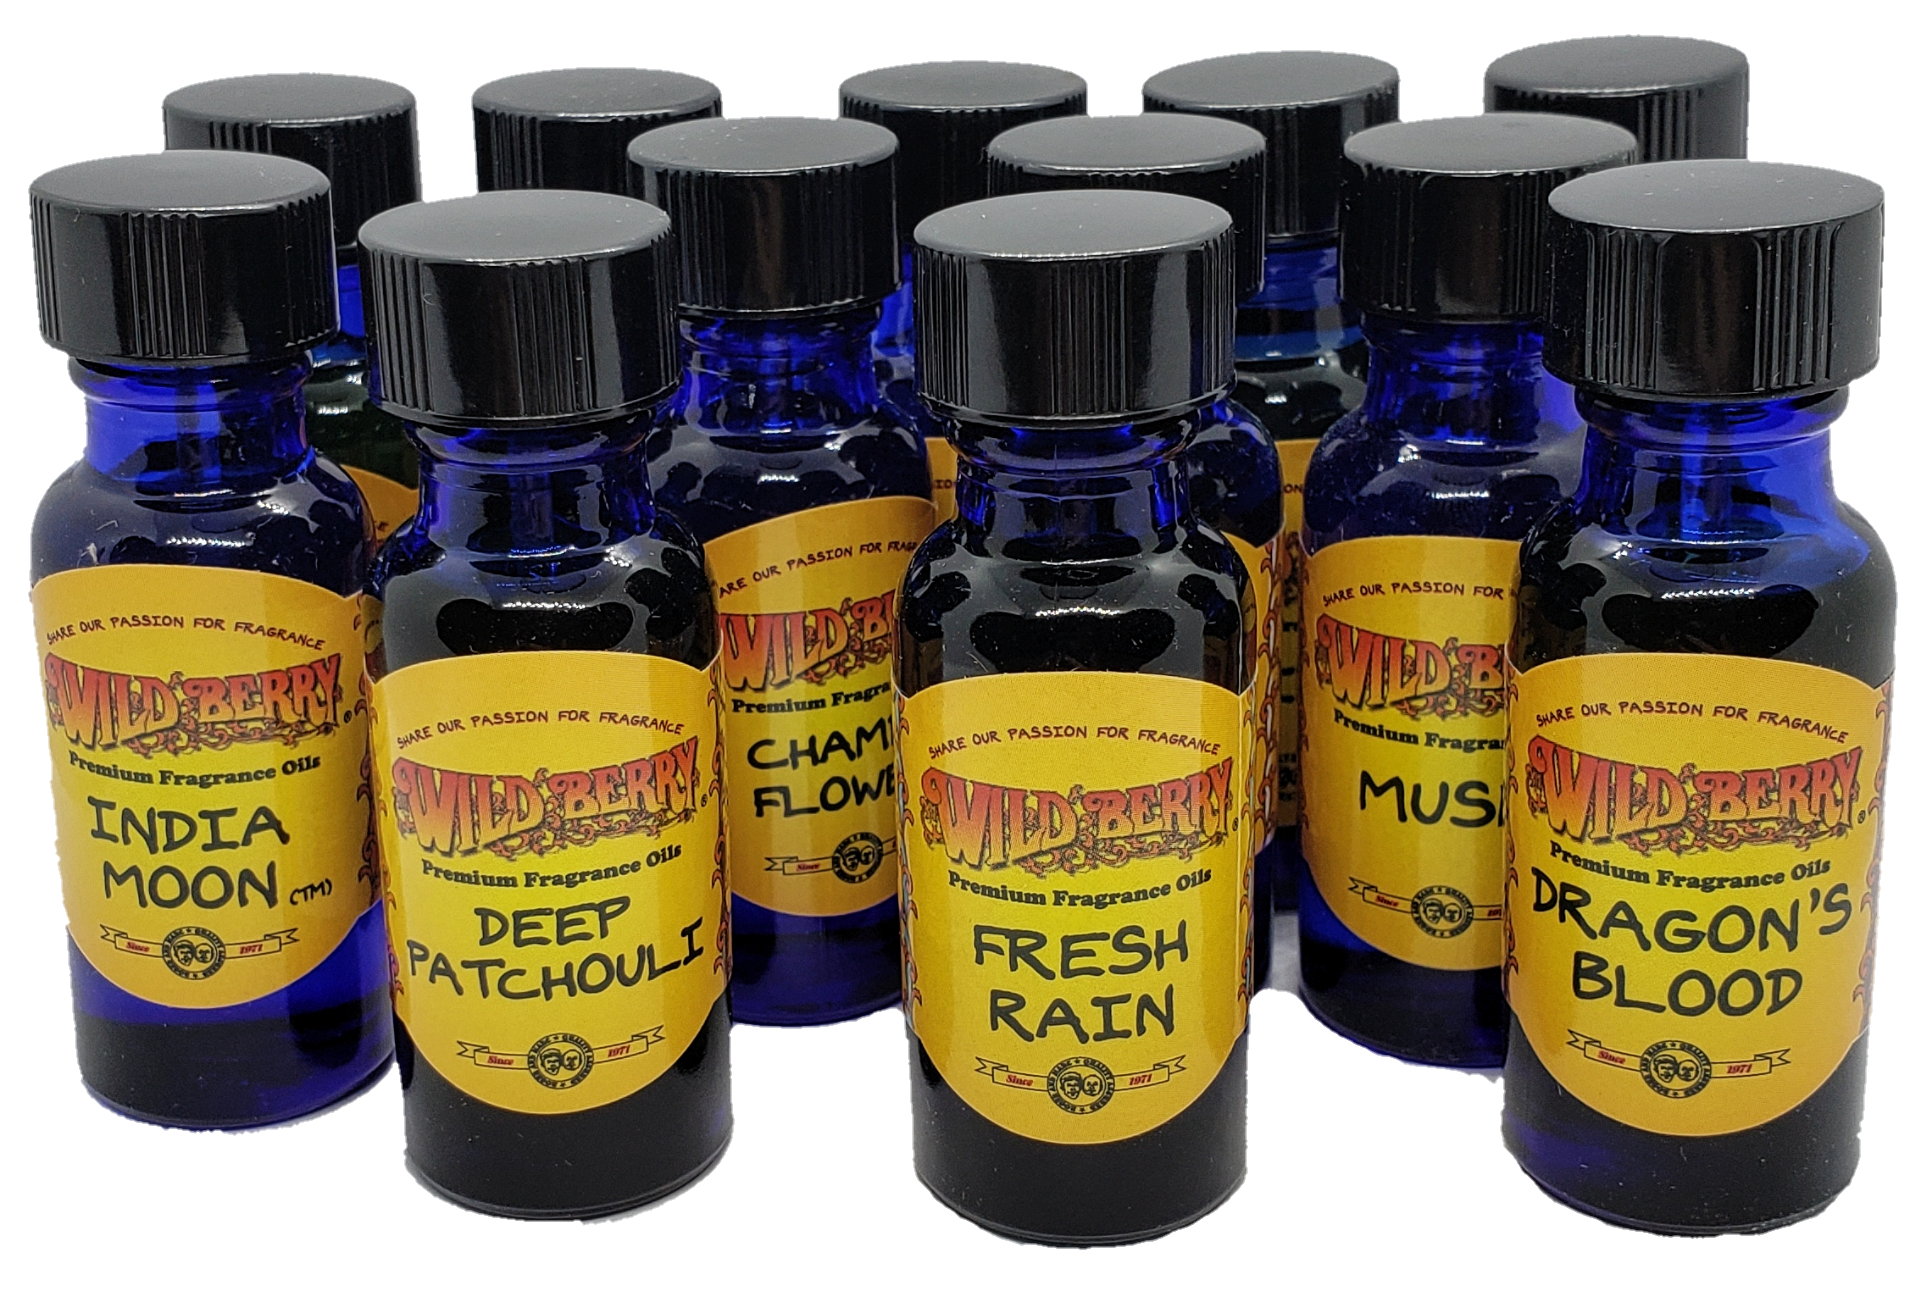 Wildberry Scented Oils: Champa Flower